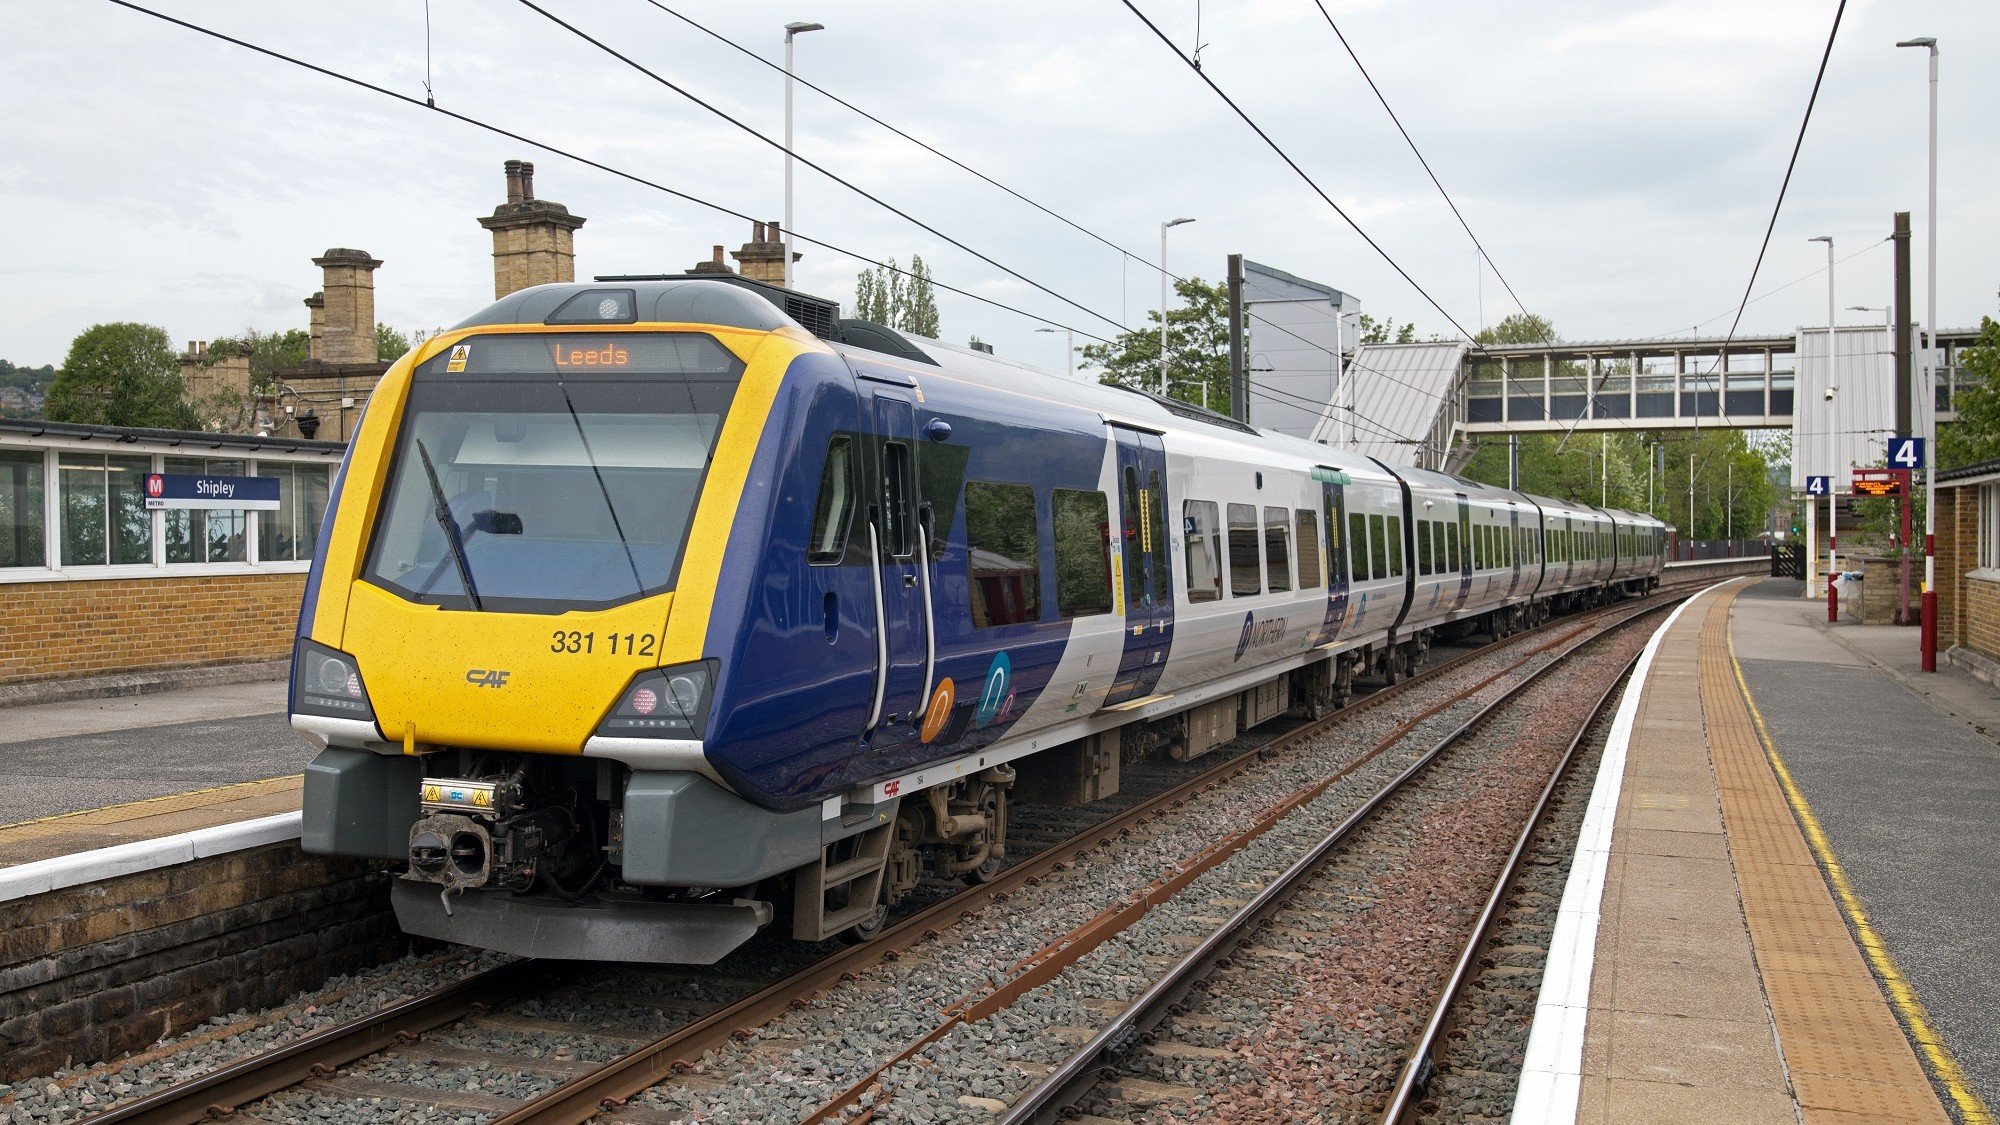 Image shows Northern service at Shipley station